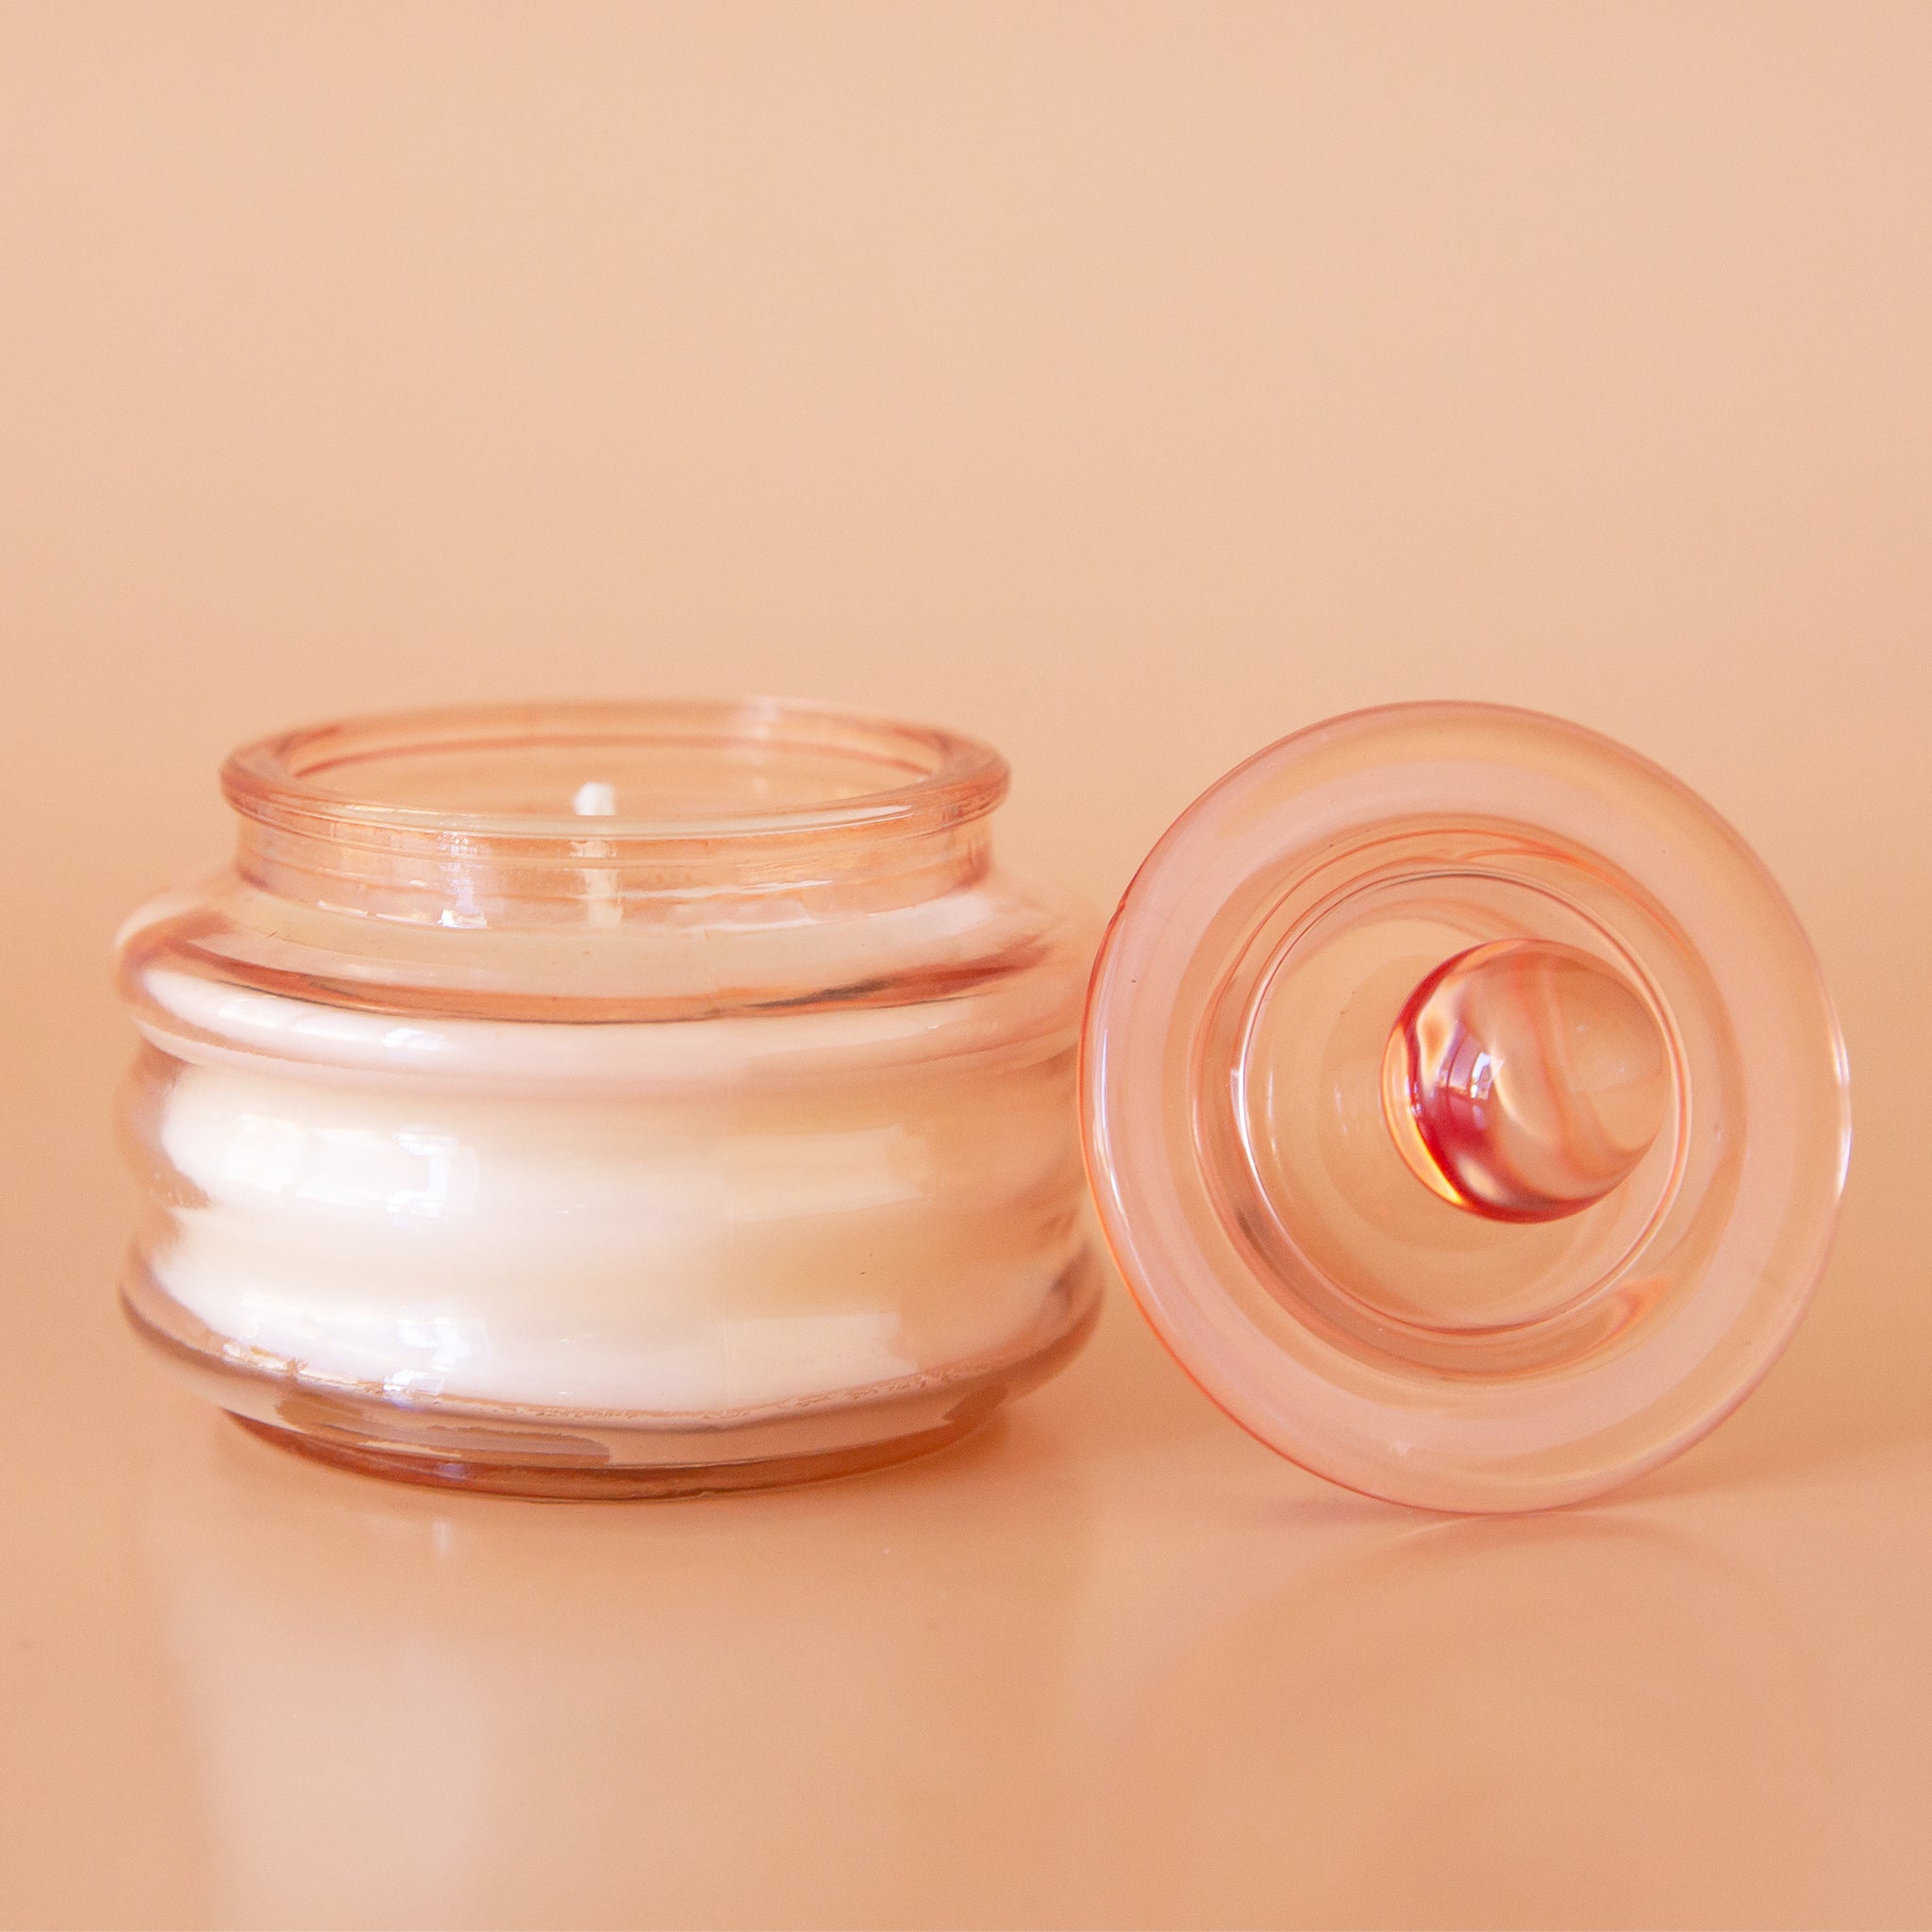 Peach colored translucent glass beam candle vessel with white wax and matching glass lid.